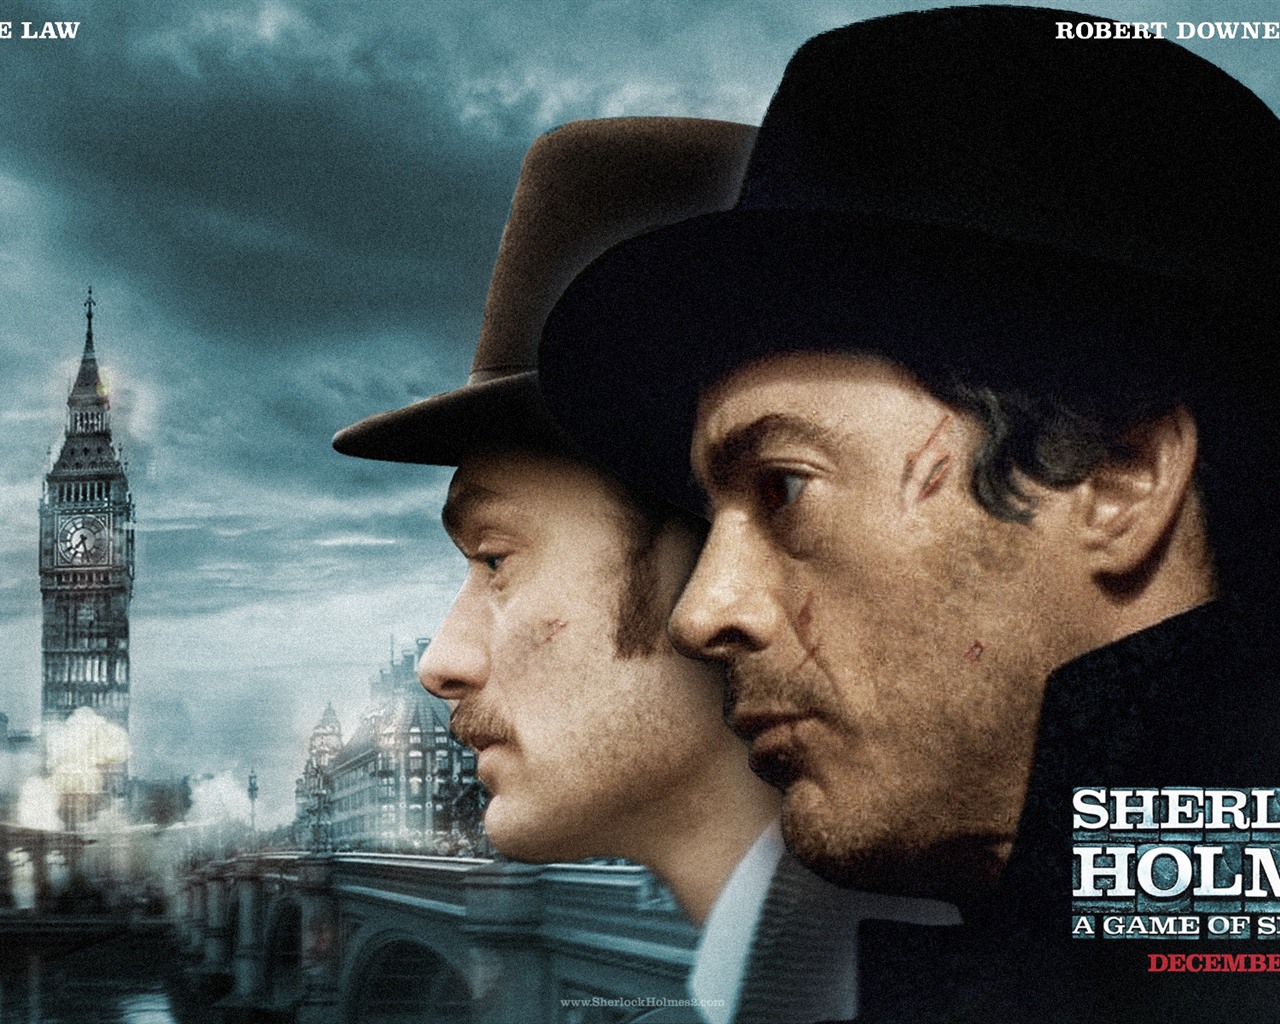 Sherlock Holmes: A Game of Shadows HD wallpapers #11 - 1280x1024